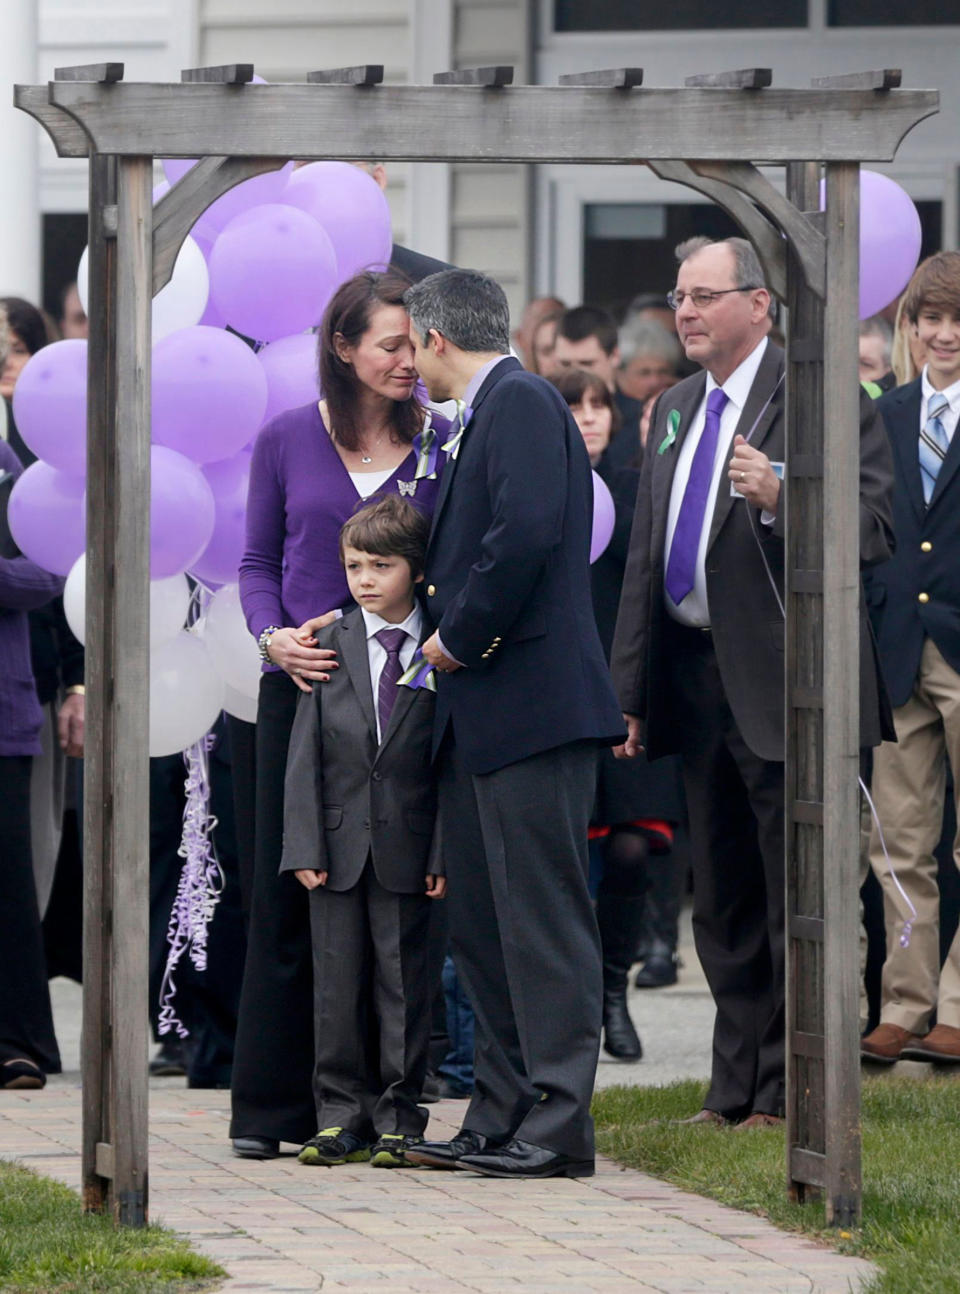 Nicole Hockley and husband Ian Hockley, with Jake between, at the end of a memorial service for Dylan Hockley in Bethel, Conn., Dec. 21, 2012.<span class="copyright">Seth Wenig—AP/Shutterstock</span>